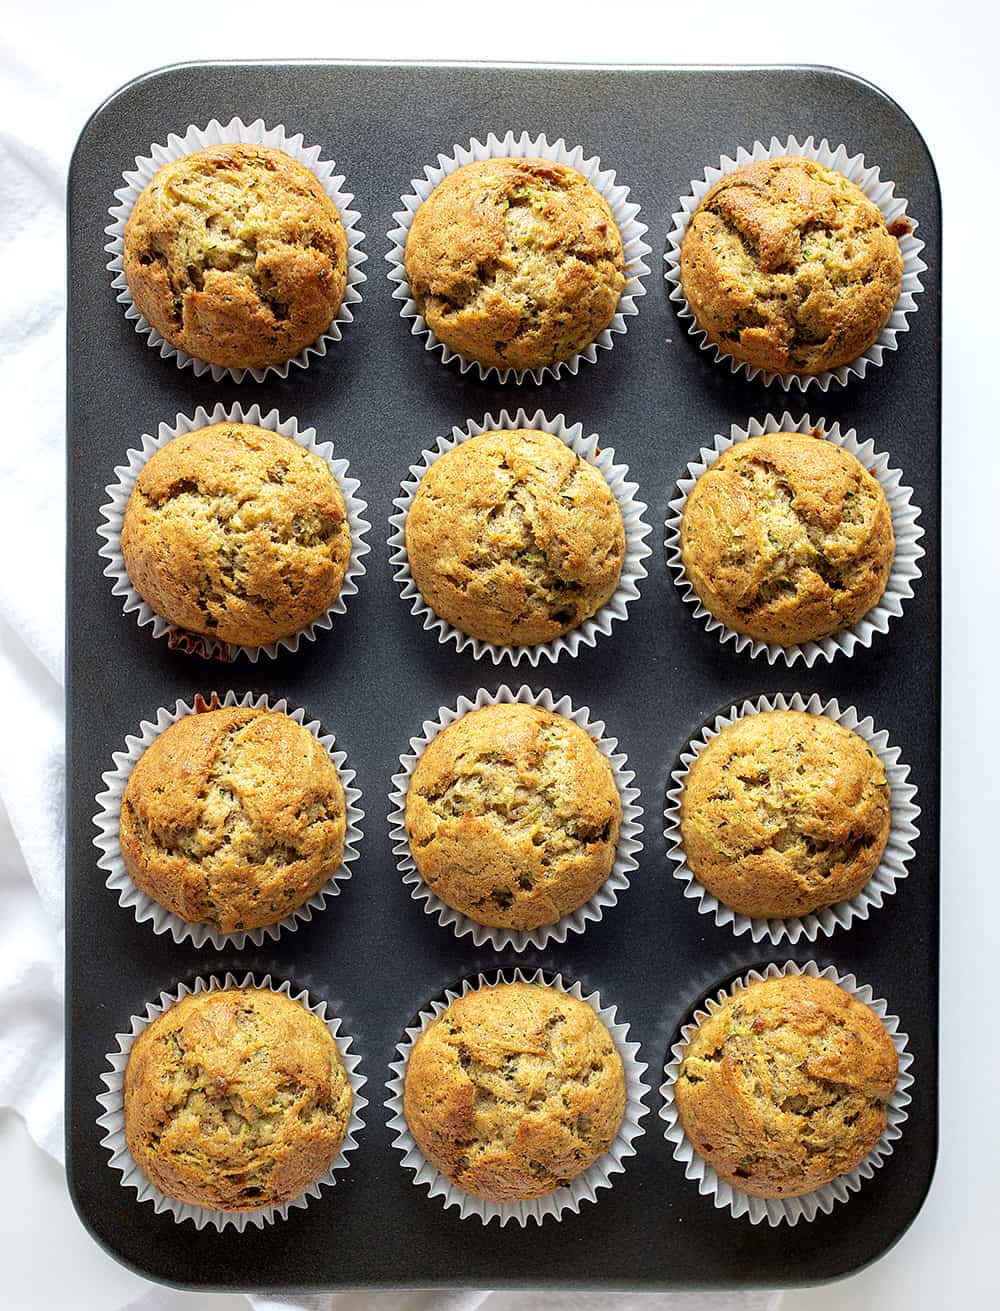 Pan of Baked Banana Zucchini Muffins From Overhead.